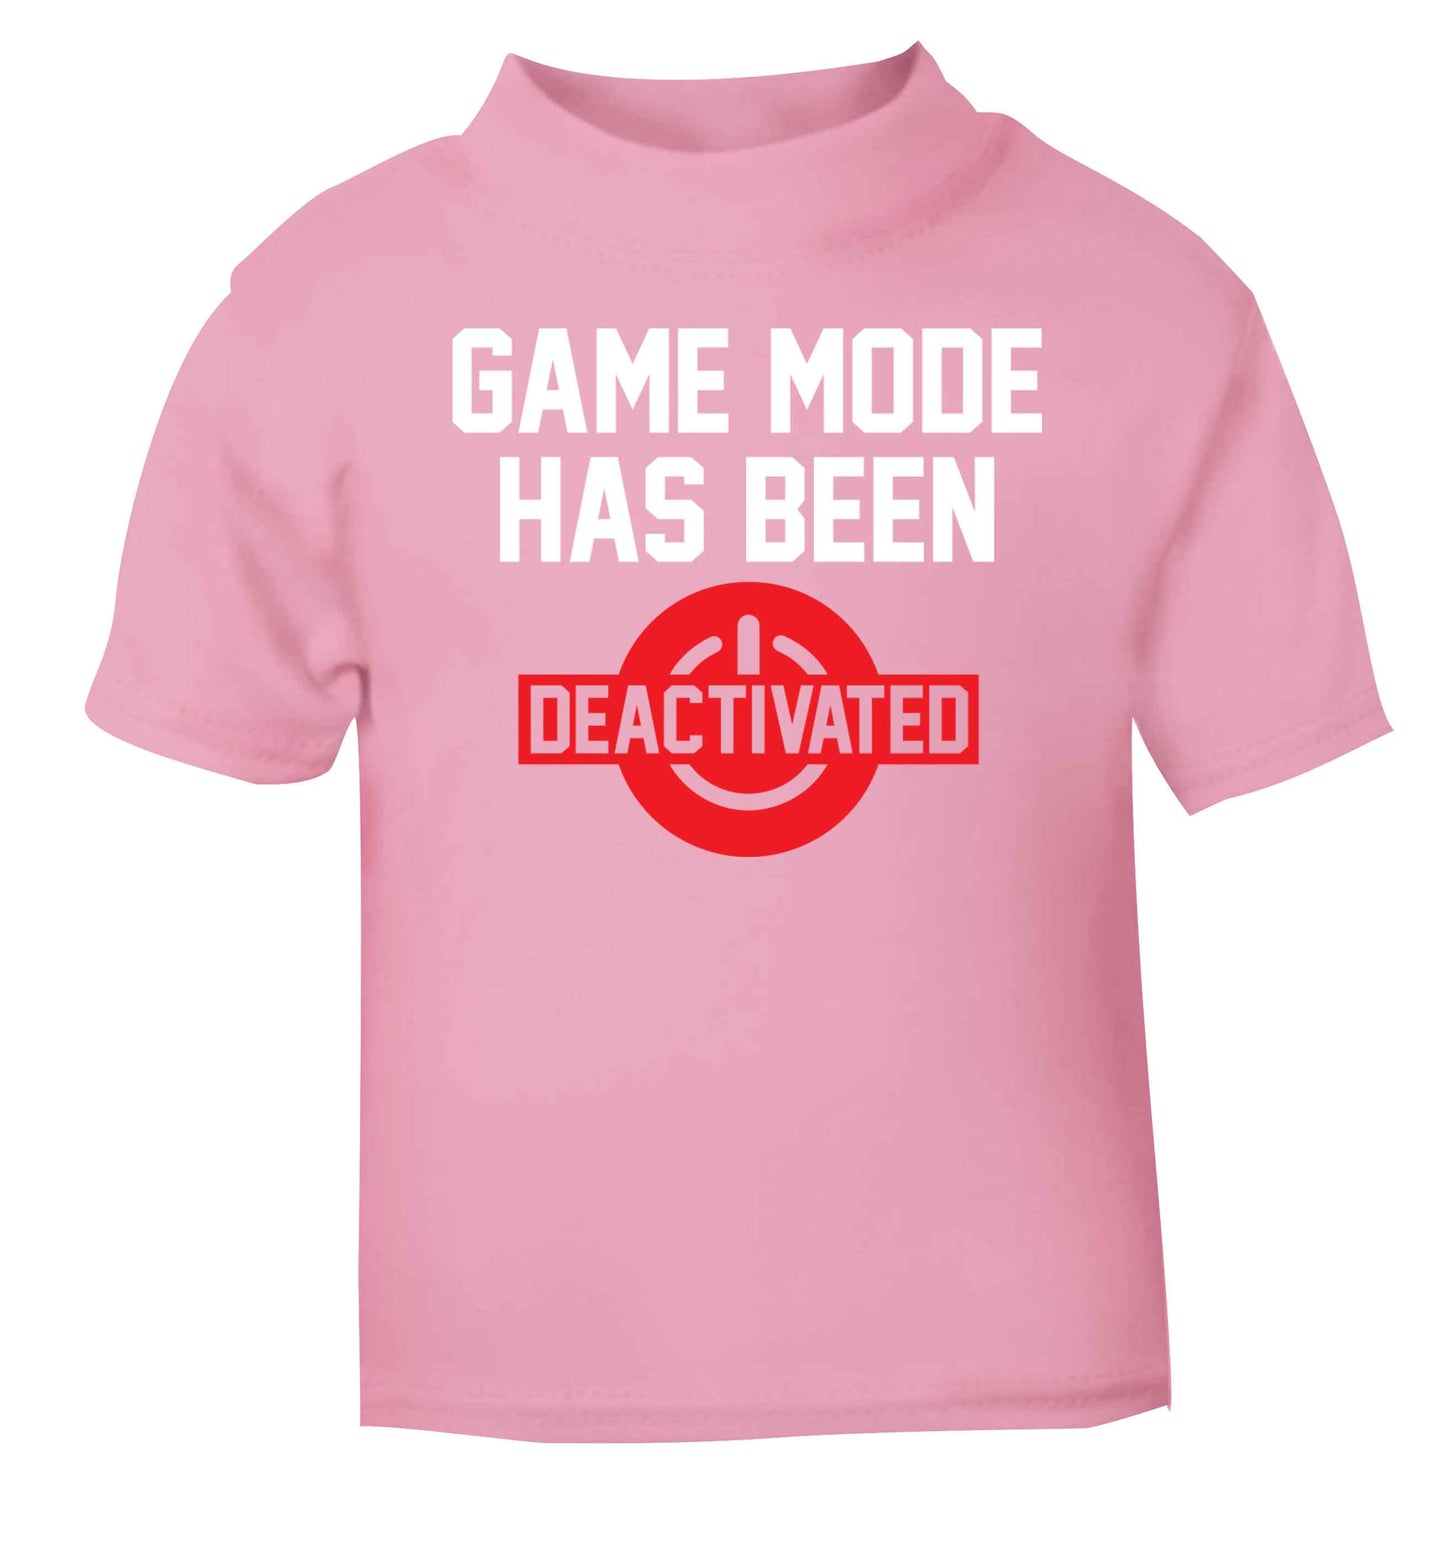 Game Mode Has Been Deactivated light pink baby toddler Tshirt 2 Years